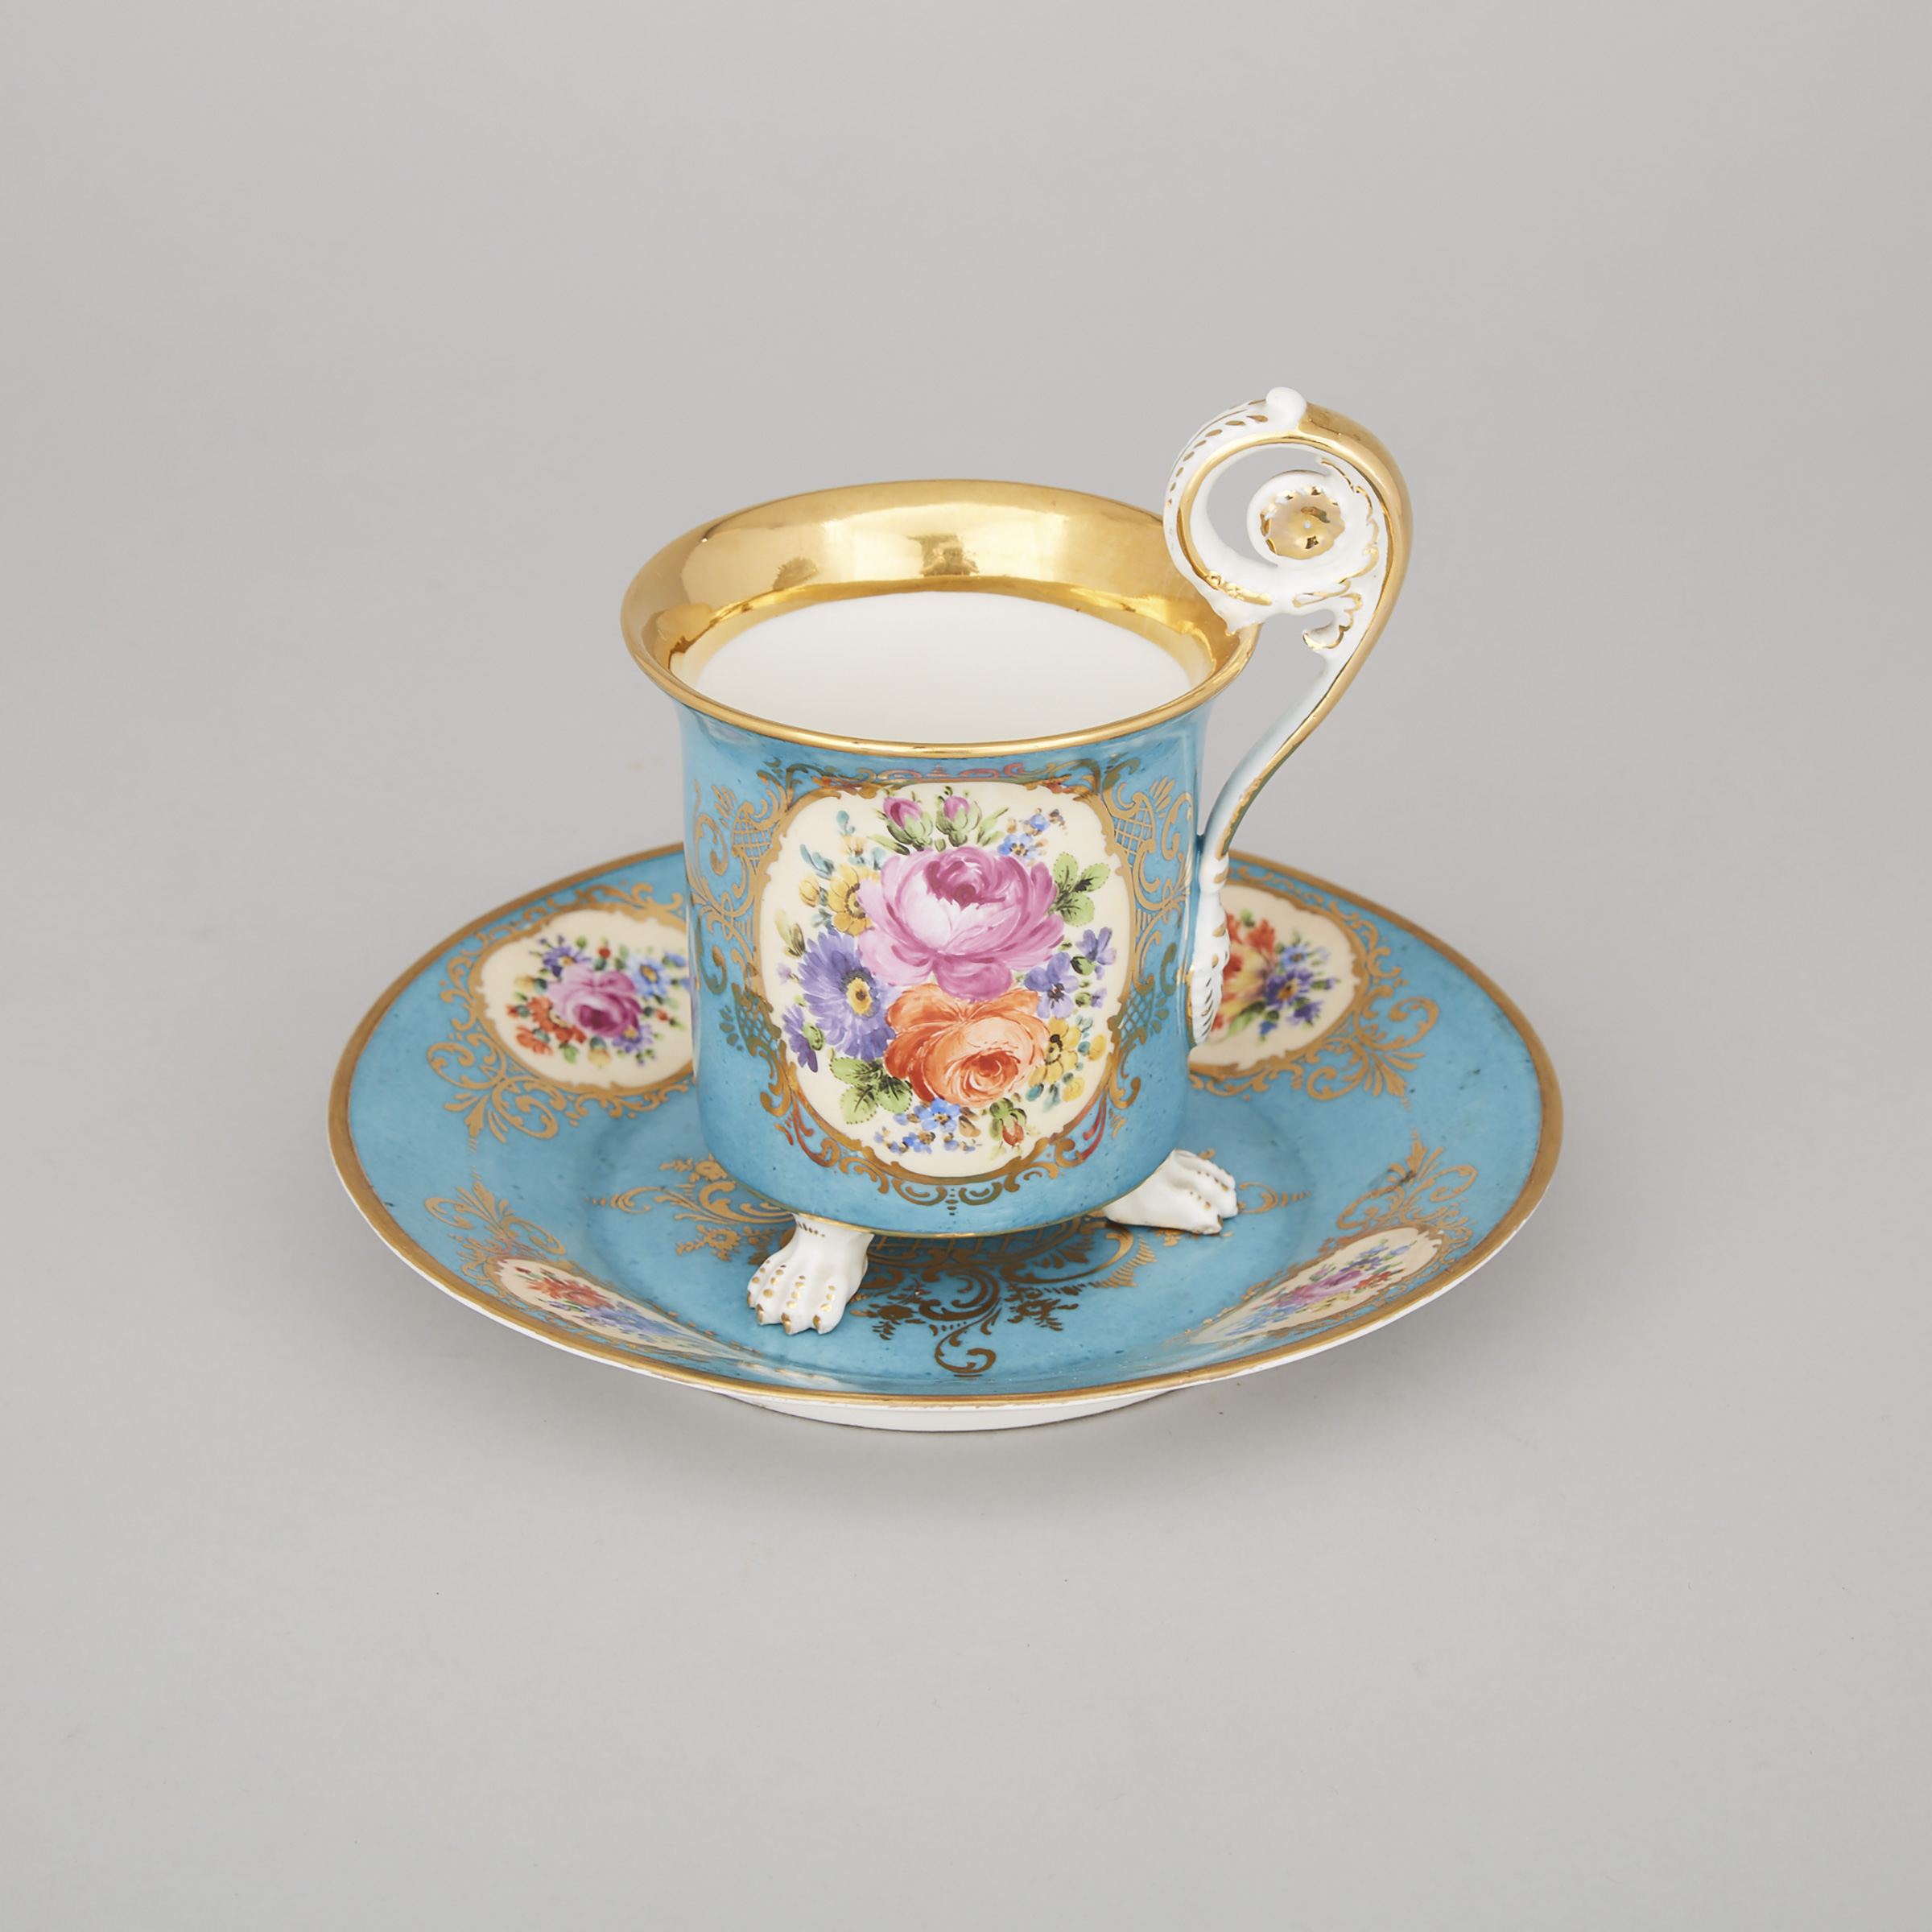 Berlin Floral Paneled Blue and Gilt Ground Cup and Saucer, c.1900